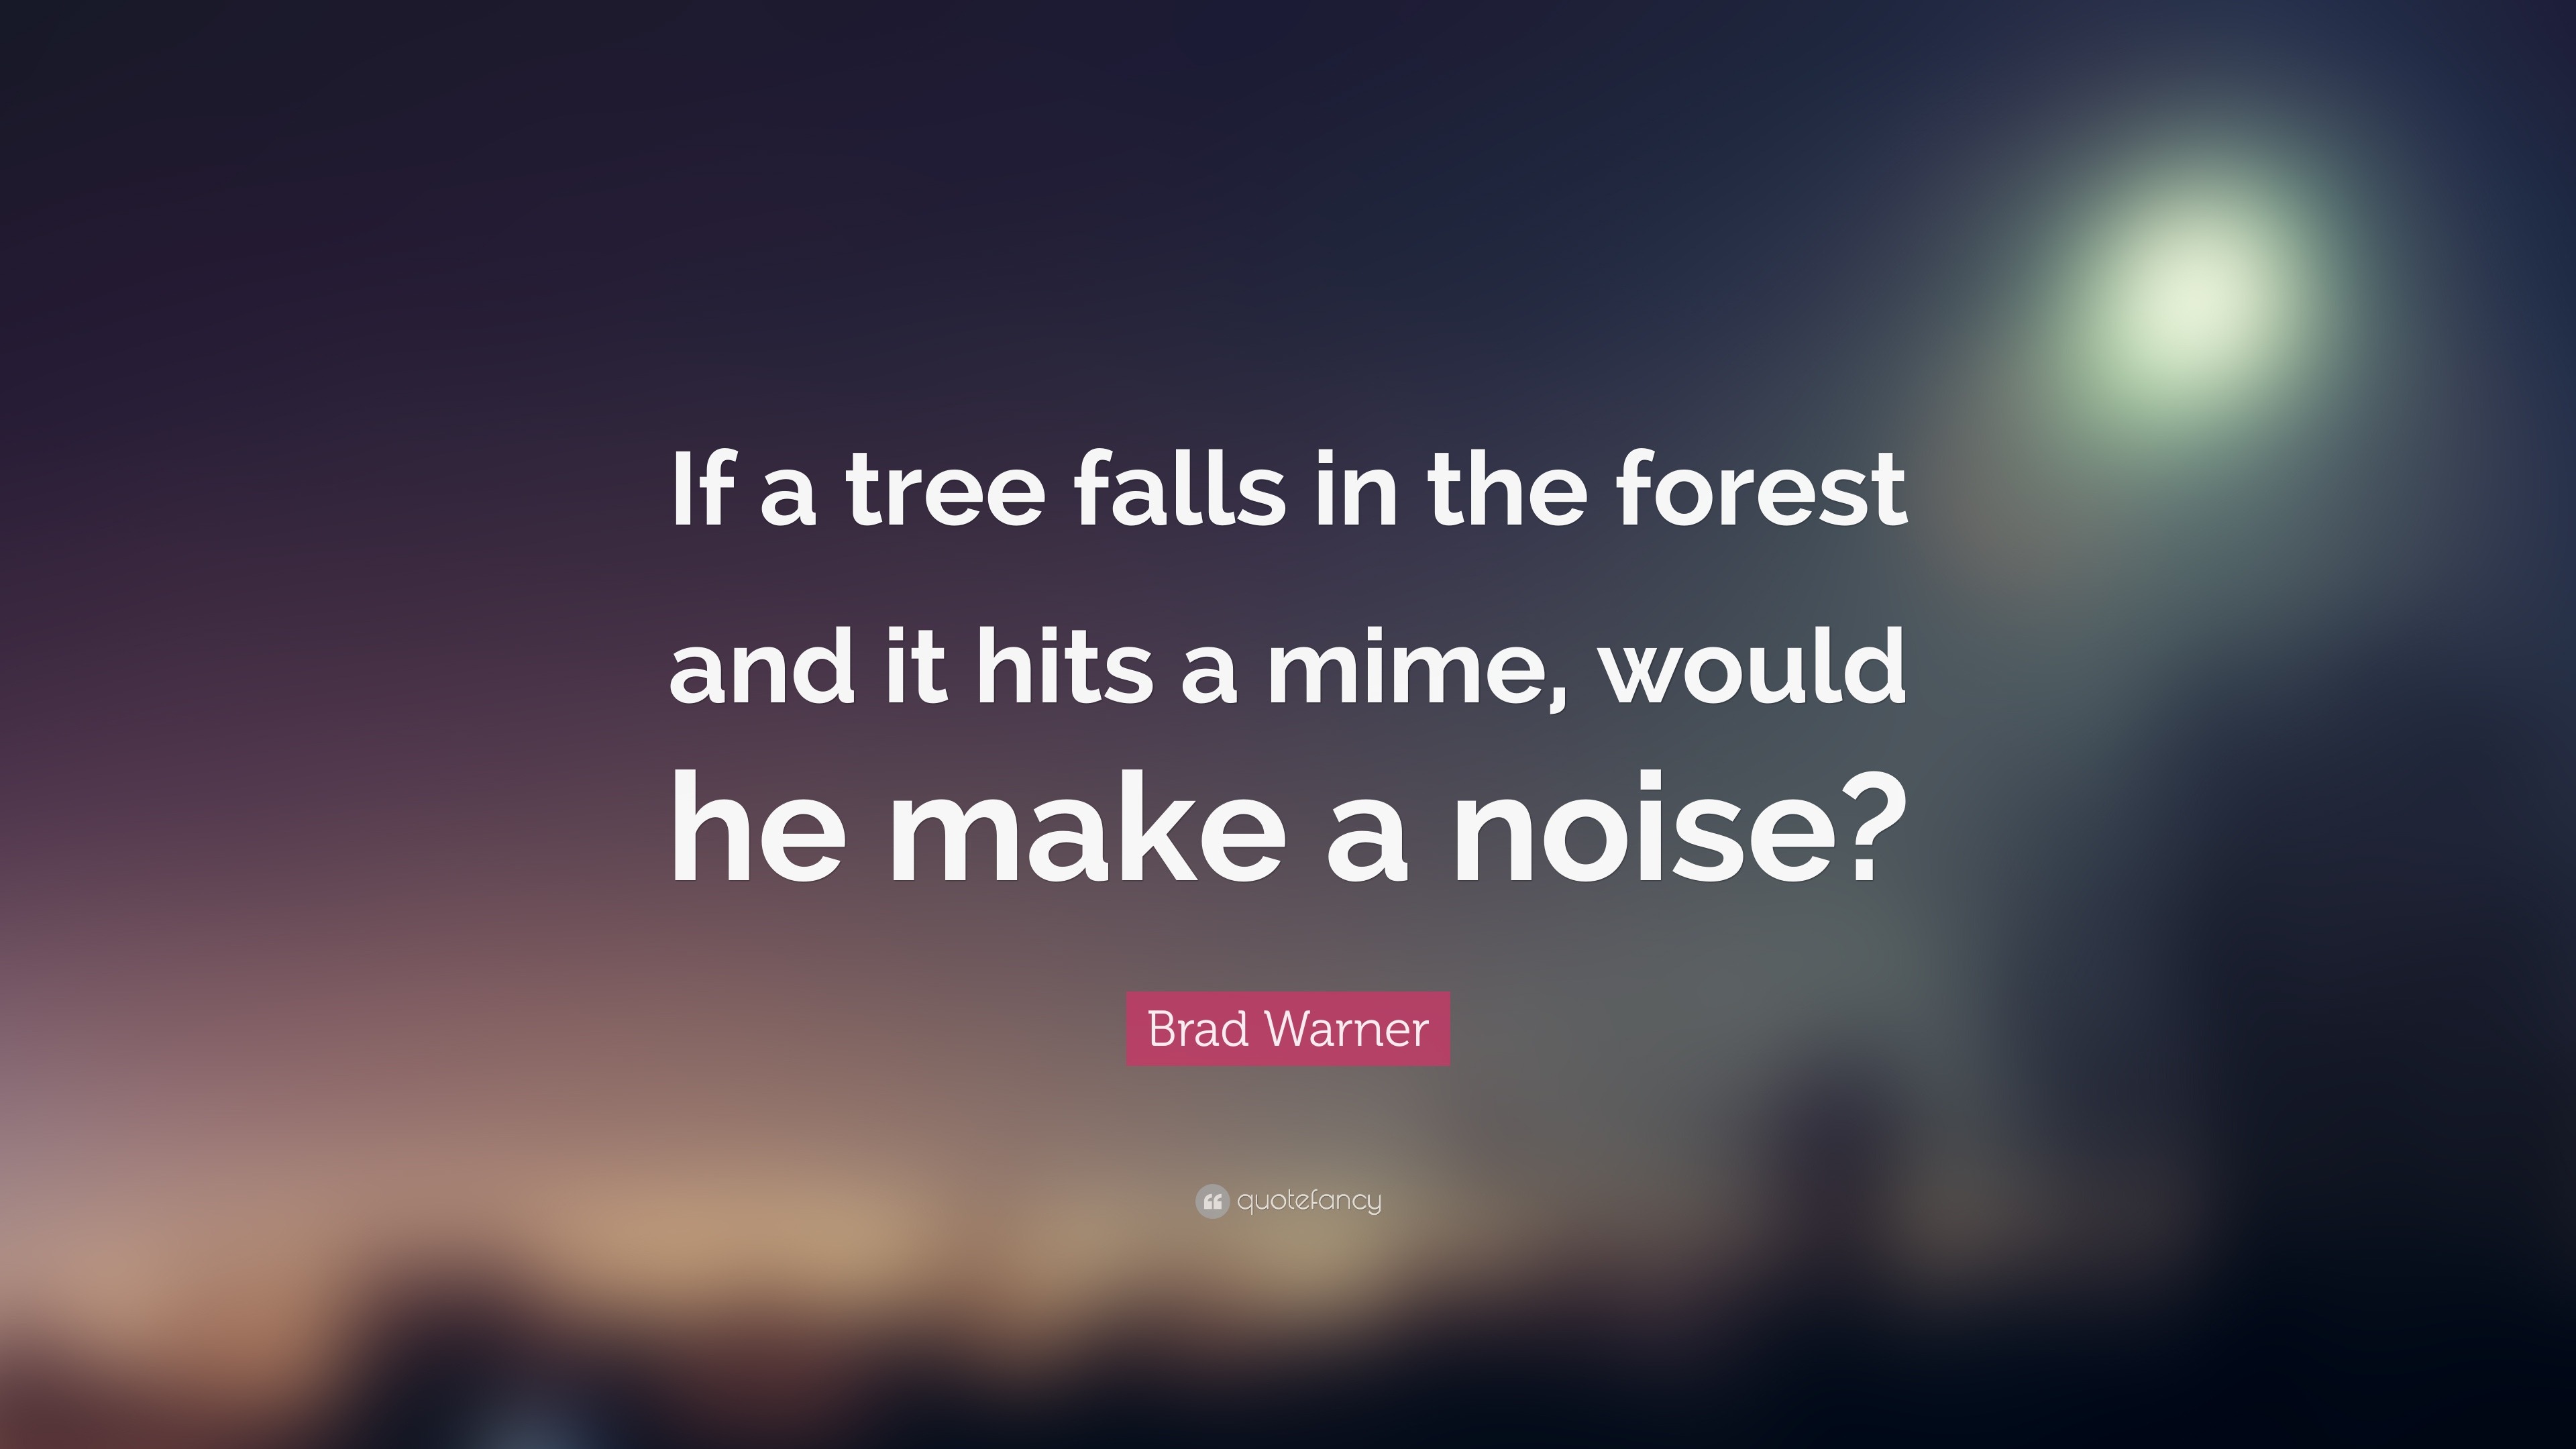 Brad Warner Quote “If a tree falls in the forest and it hits a mime